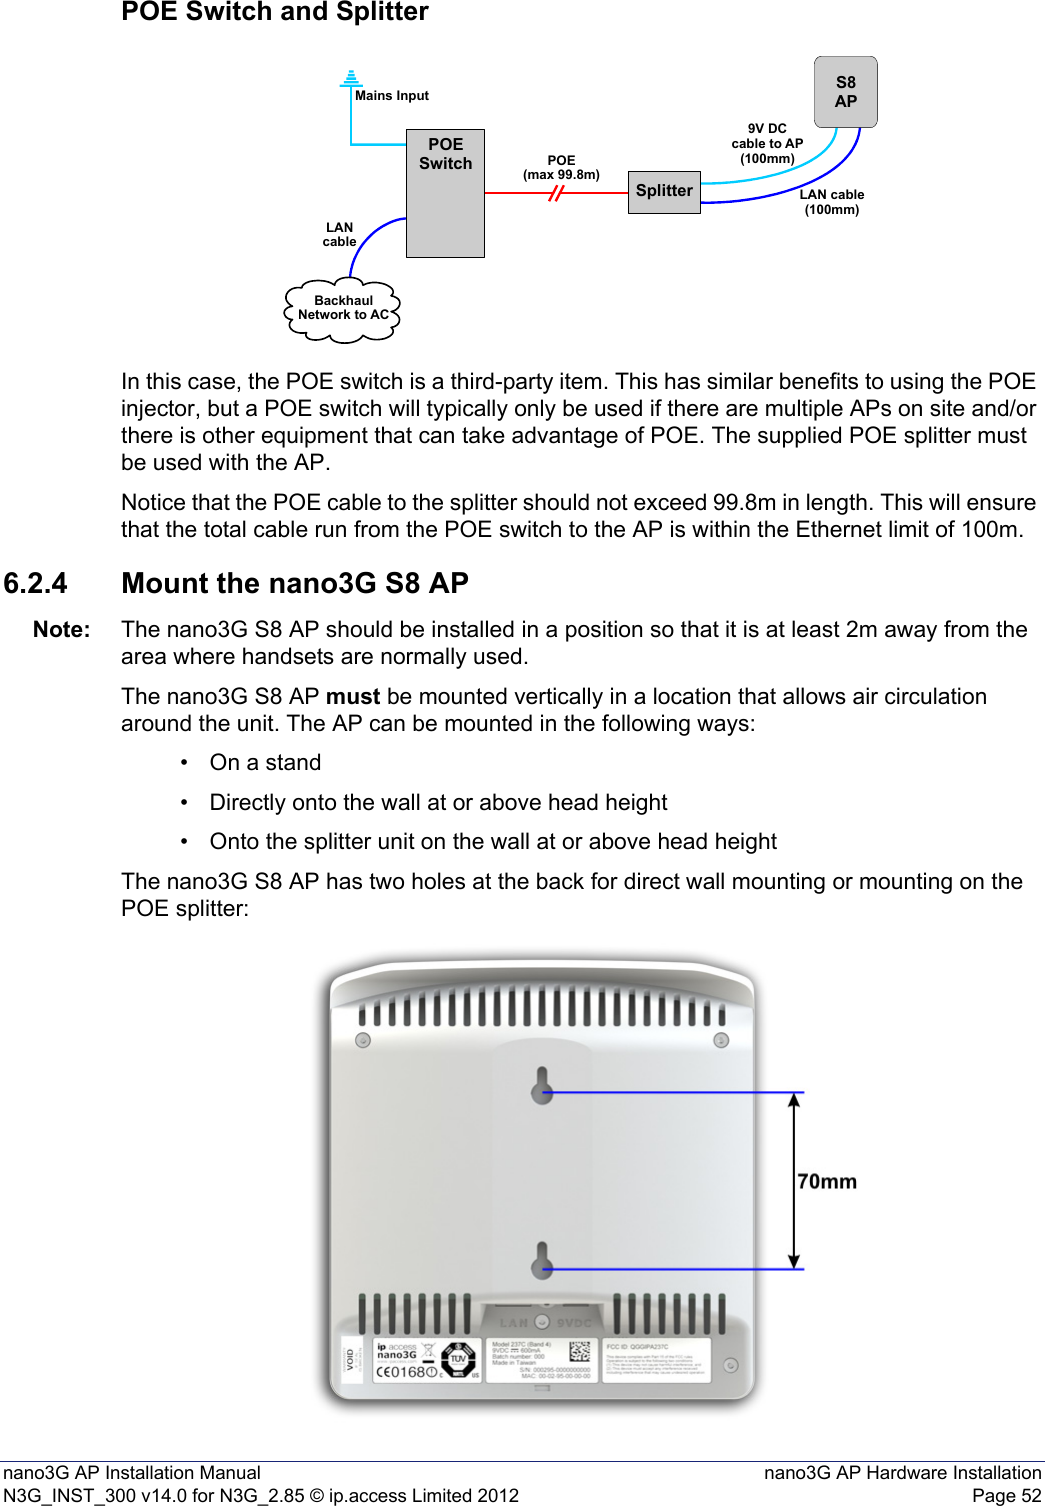 nano3G AP Installation Manual nano3G AP Hardware InstallationN3G_INST_300 v14.0 for N3G_2.85 © ip.access Limited 2012 Page 52POE Switch and SplitterIn this case, the POE switch is a third-party item. This has similar benefits to using the POE injector, but a POE switch will typically only be used if there are multiple APs on site and/or there is other equipment that can take advantage of POE. The supplied POE splitter must be used with the AP.Notice that the POE cable to the splitter should not exceed 99.8m in length. This will ensure that the total cable run from the POE switch to the AP is within the Ethernet limit of 100m.6.2.4 Mount the nano3G S8 APNote: The nano3G S8 AP should be installed in a position so that it is at least 2m away from the area where handsets are normally used.The nano3G S8 AP must be mounted vertically in a location that allows air circulation around the unit. The AP can be mounted in the following ways:• On a stand• Directly onto the wall at or above head height• Onto the splitter unit on the wall at or above head heightThe nano3G S8 AP has two holes at the back for direct wall mounting or mounting on the POE splitter:SplitterPOESwitchS8APPOE(max 99.8m)Mains InputLANcableBackhaulNetwork to AC9V DCcable to AP(100mm)LAN cable(100mm)